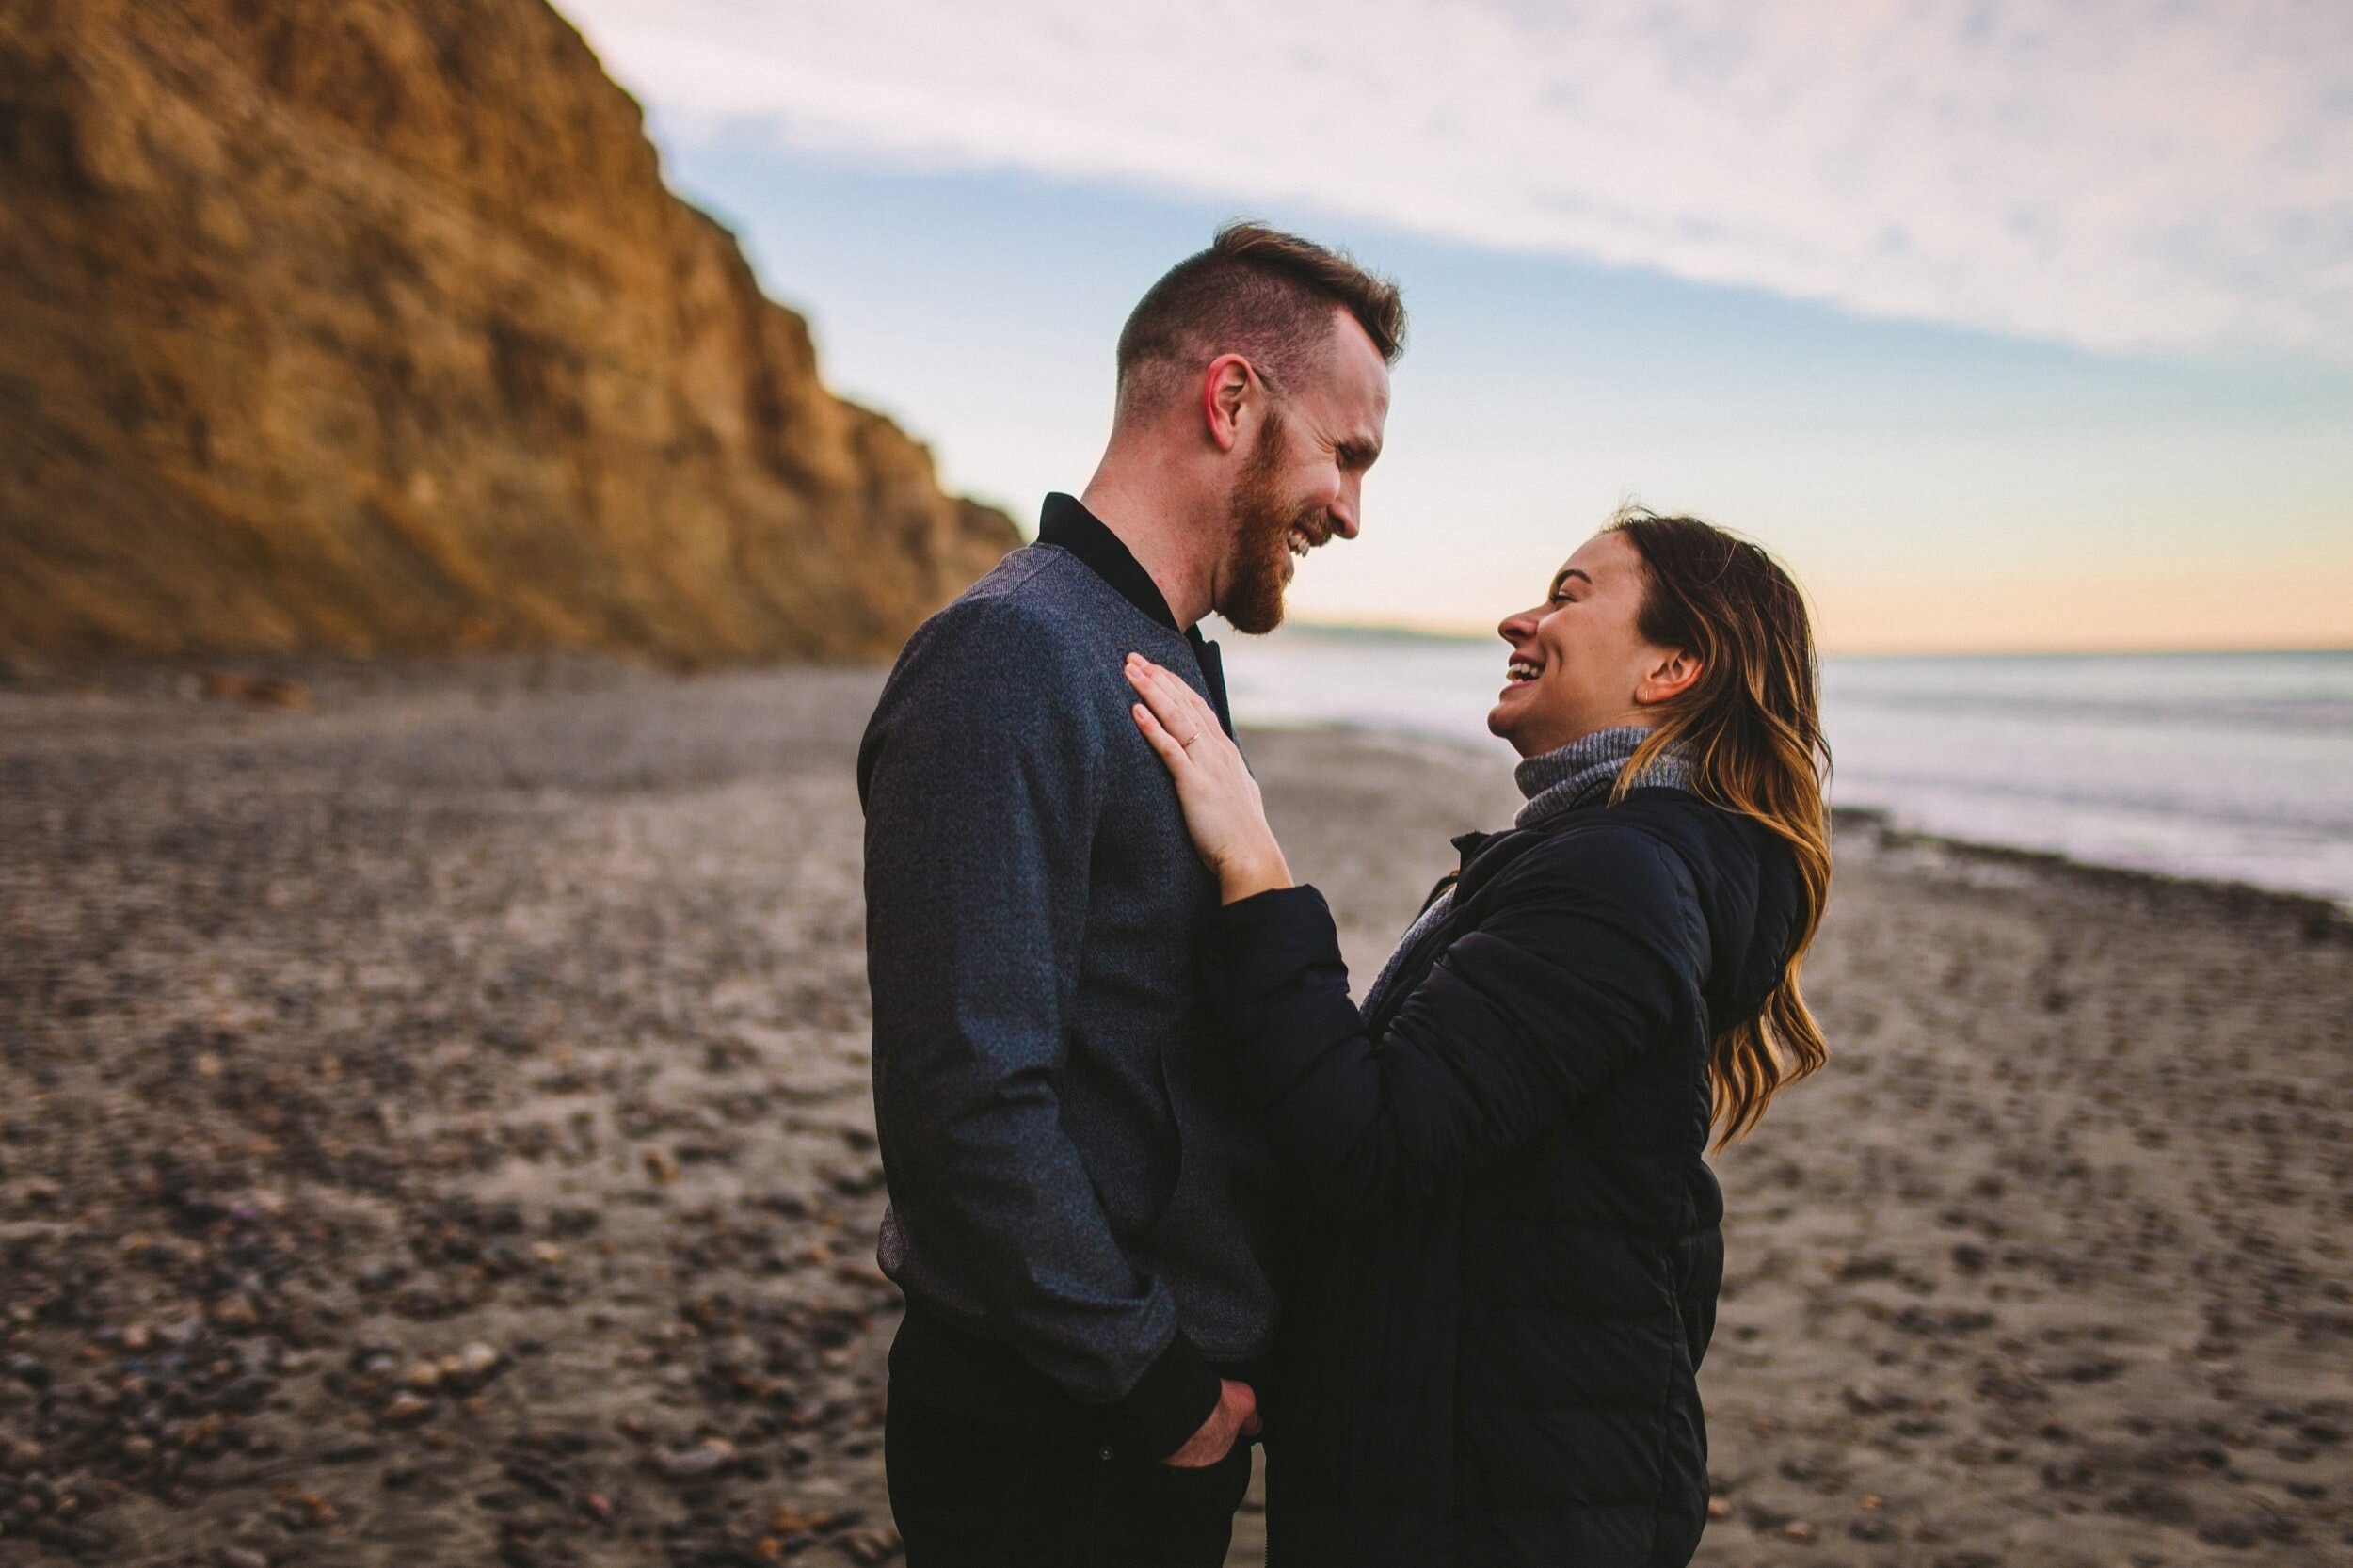 Suprise Proposal & Engagement Photography at Torrey Pines at Sunrise in San Diego-38.jpg